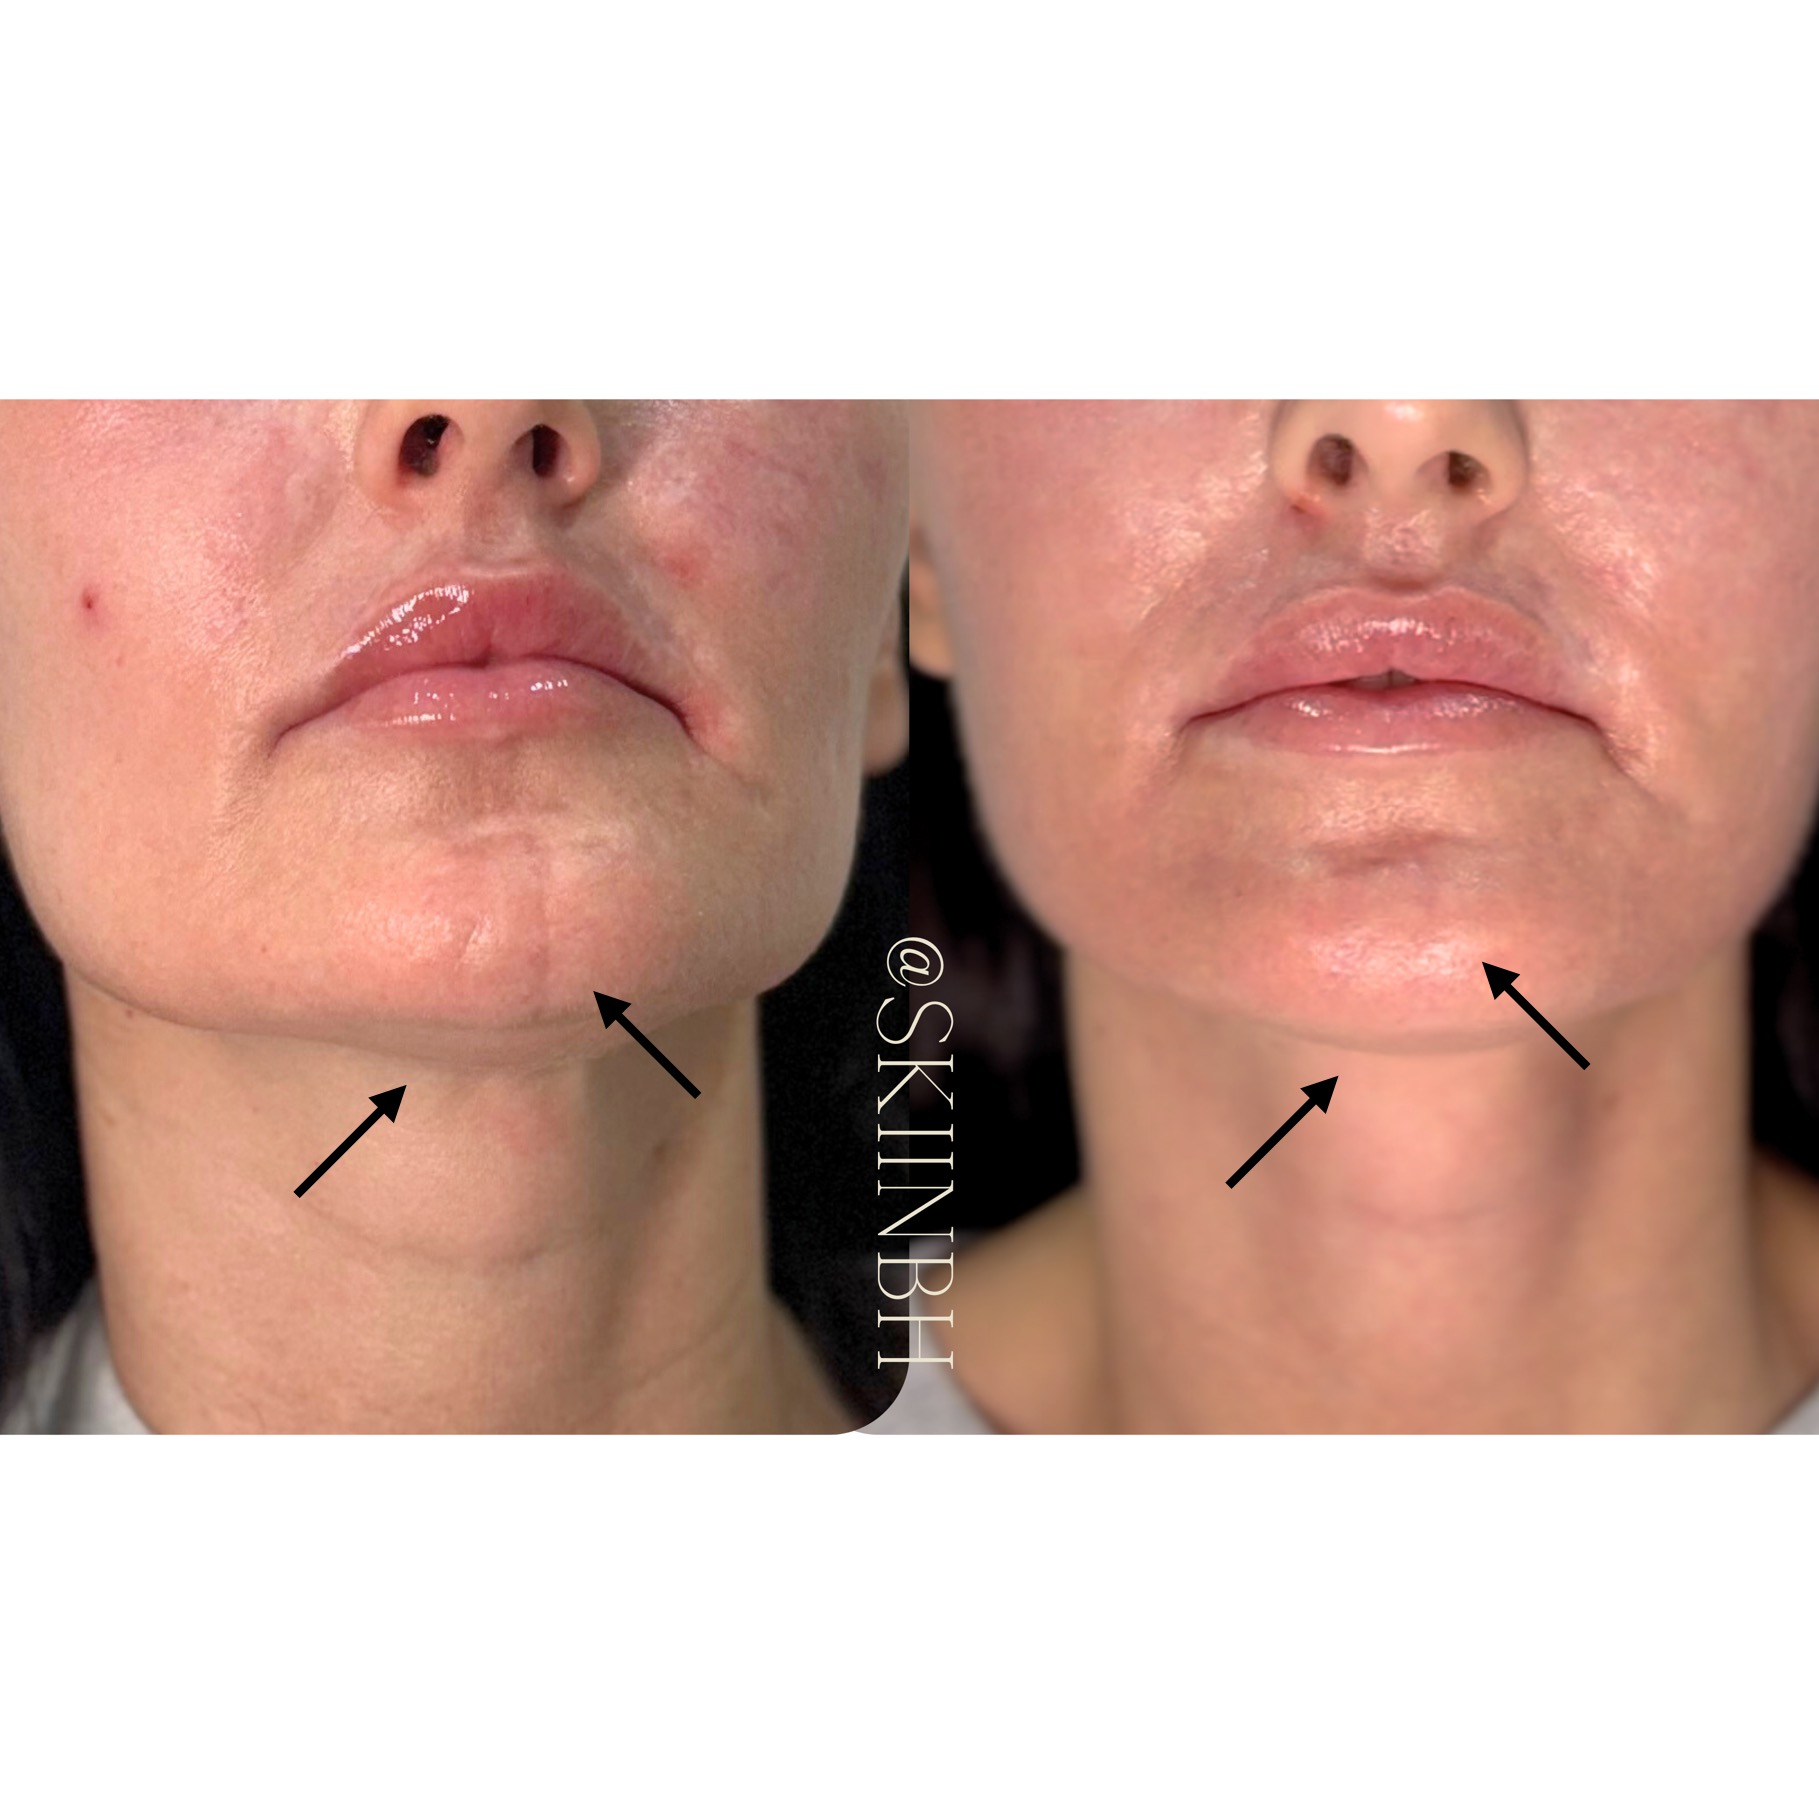 Morpheus8 results for scars and skin tightening!